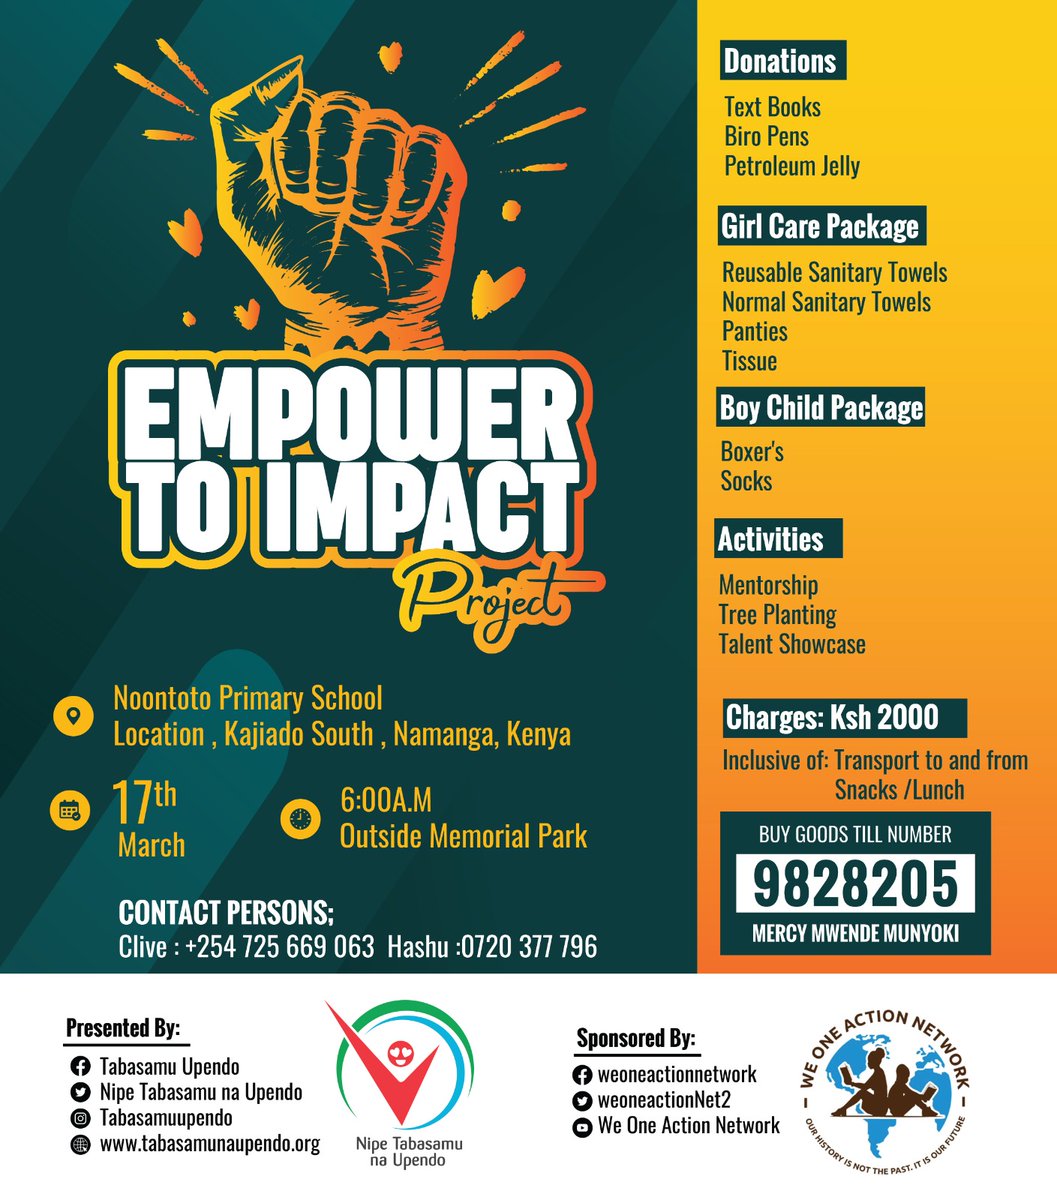 As we work to create light for others, we naturally light our own way. Join us this march 17th in collaboration with  @WeOneActionNet2 on the Empower To Impact Project at Noontoto Primary School. If not us who? If not now when? #Empowertoimpact #TogetherWeCan #Togetherwemust.